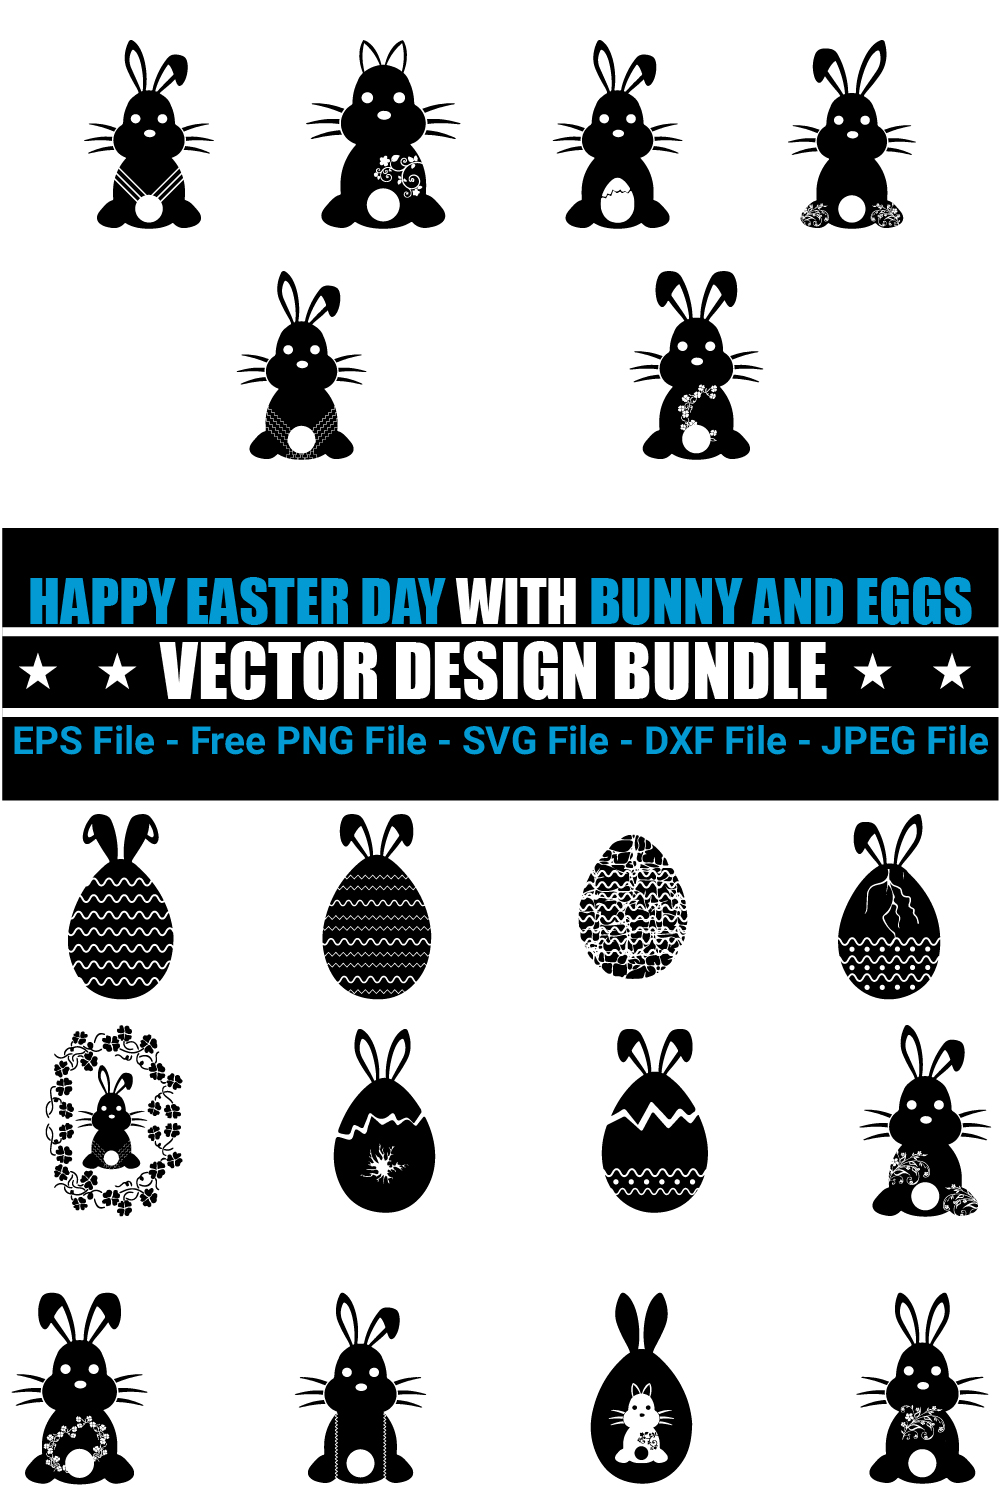 Happy Easter Day With Bunny And Eggs Design Bundle - Pinterest.